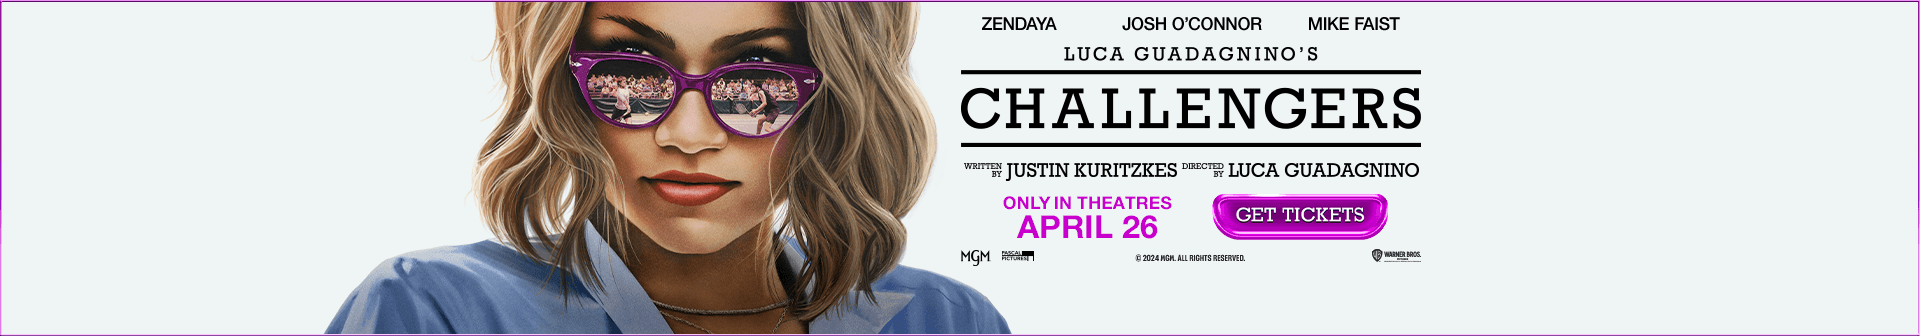 Challengers, only in theatres April 26. Get tickets